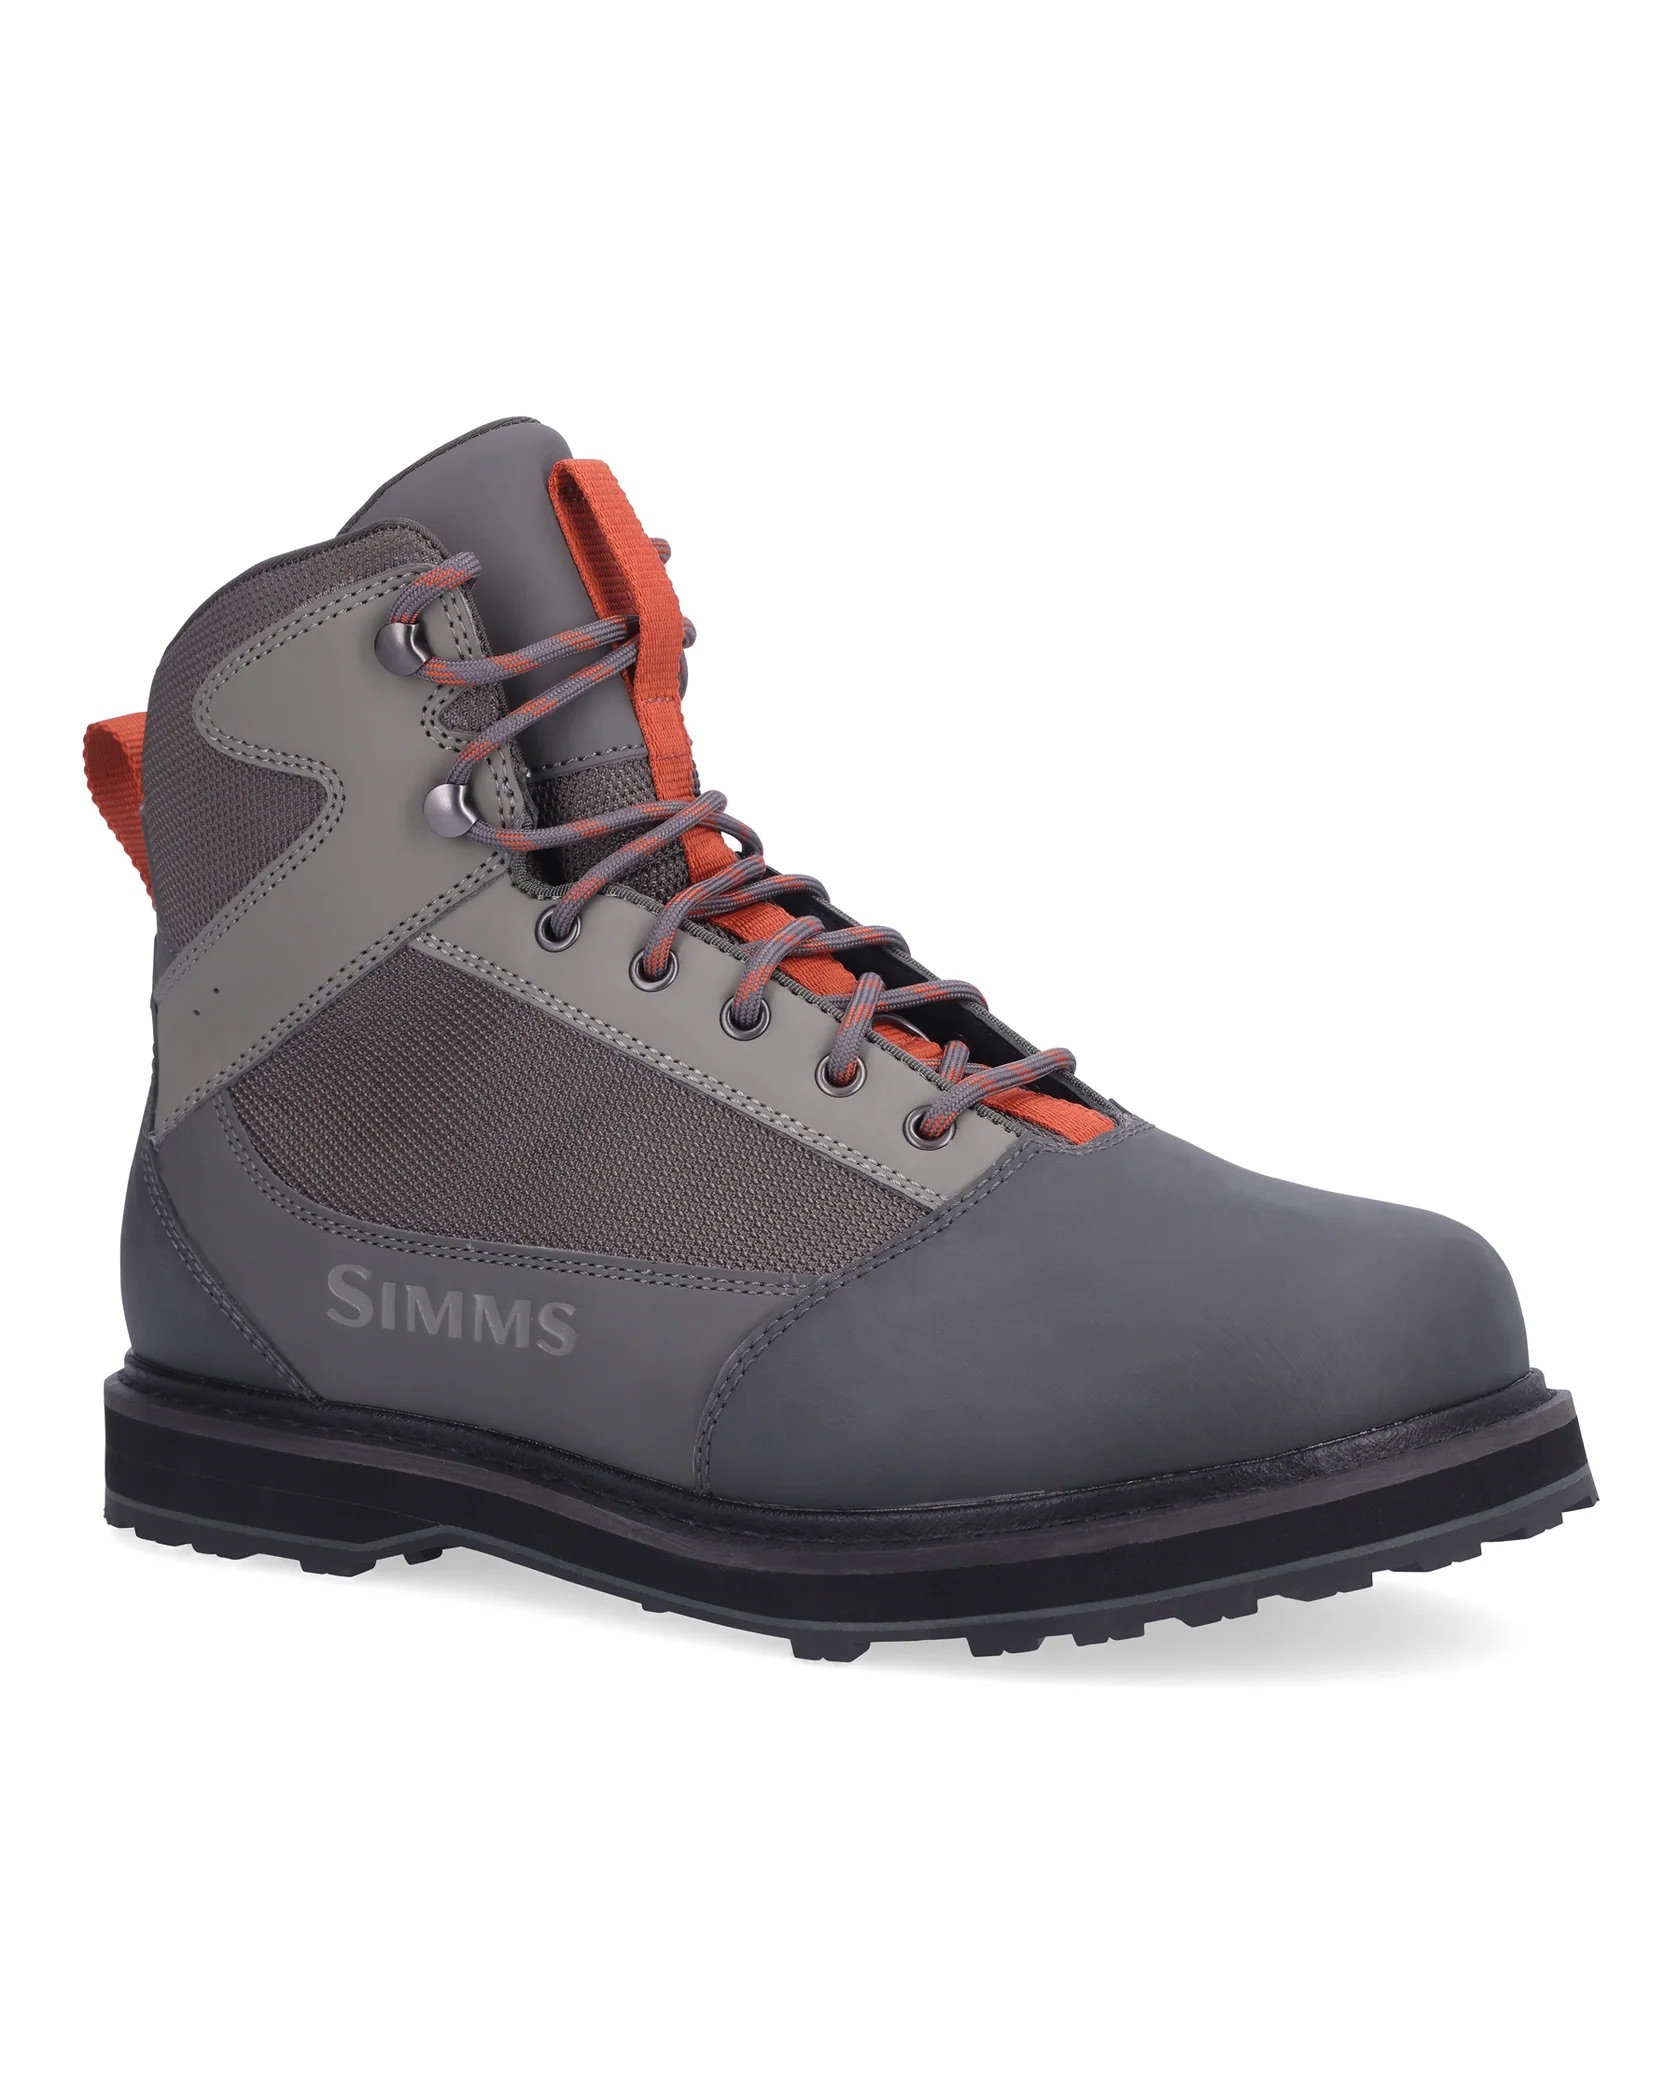 Simms Tributary Wading Boot - Rubber - Size 8